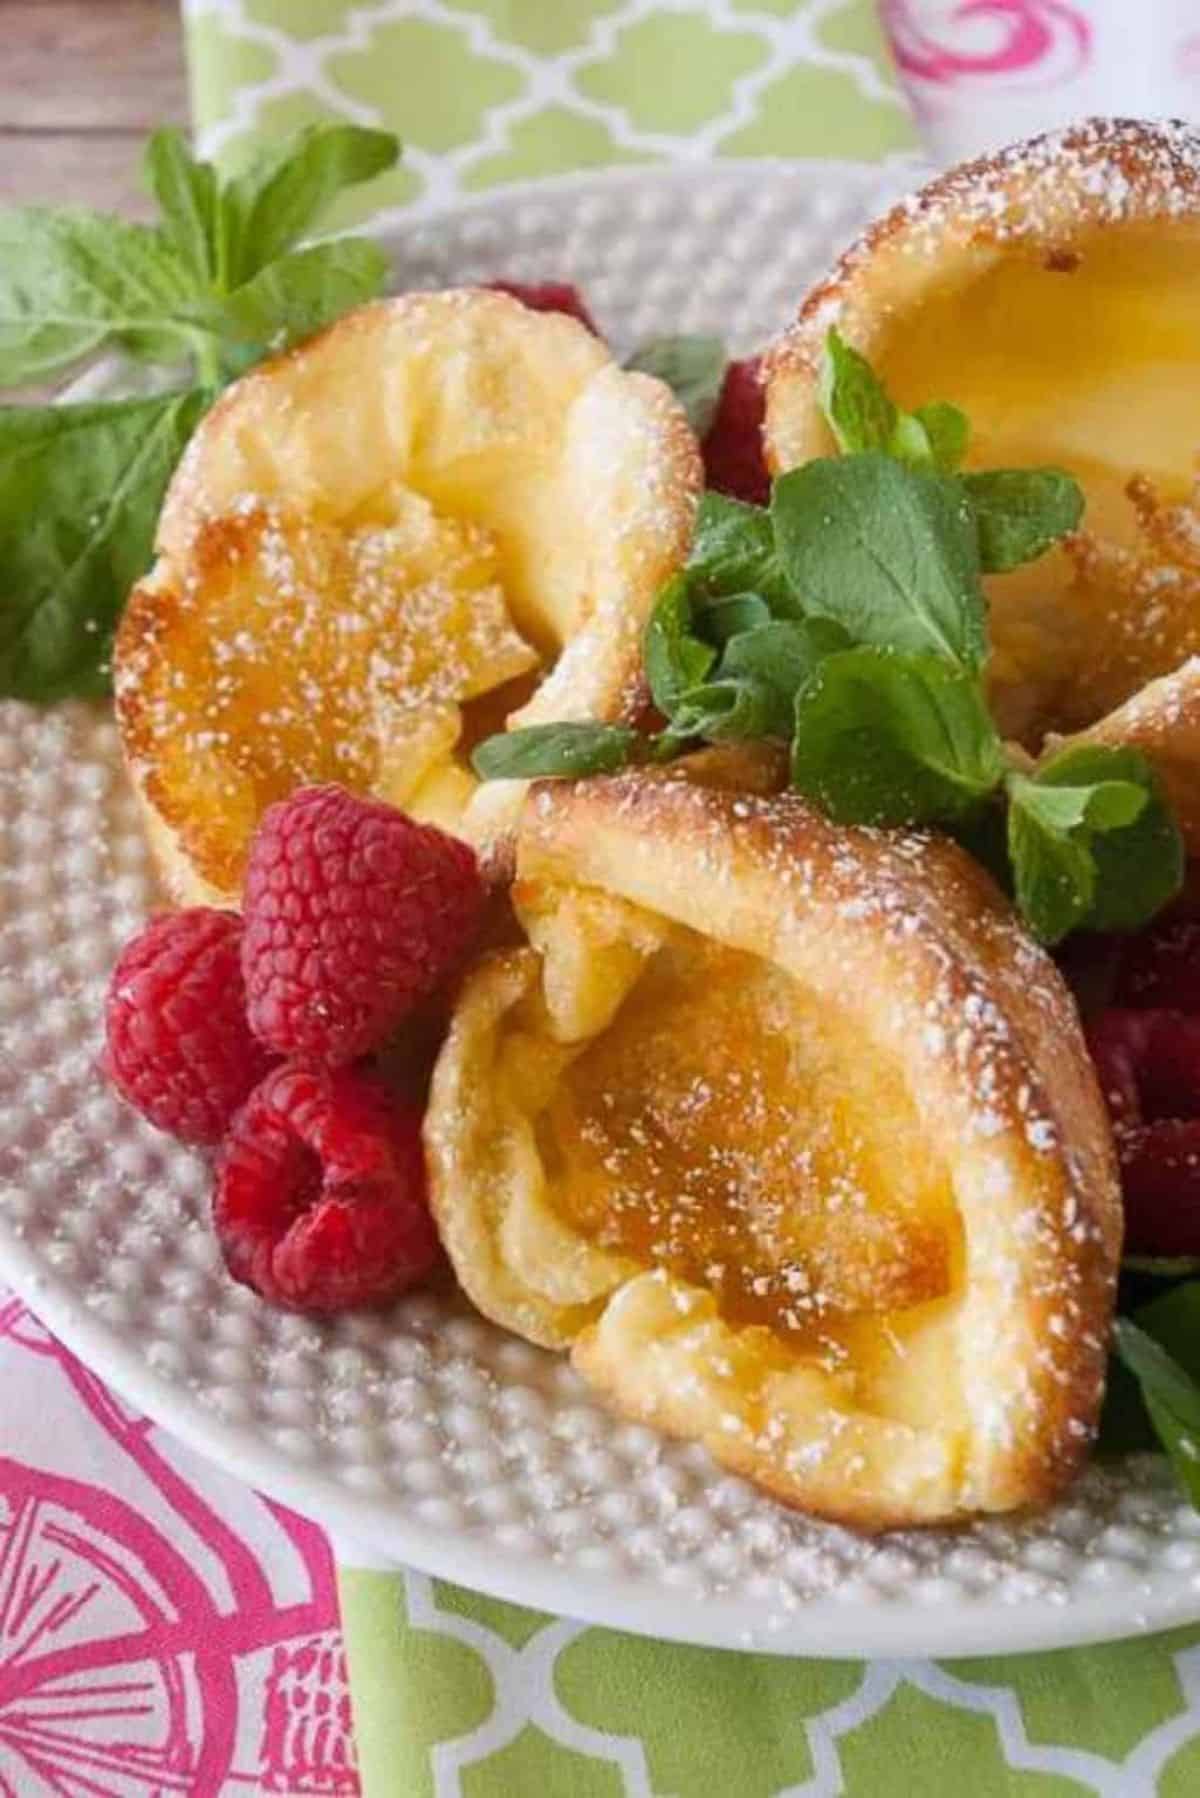 German Pancakes with raspberries on a white tray.